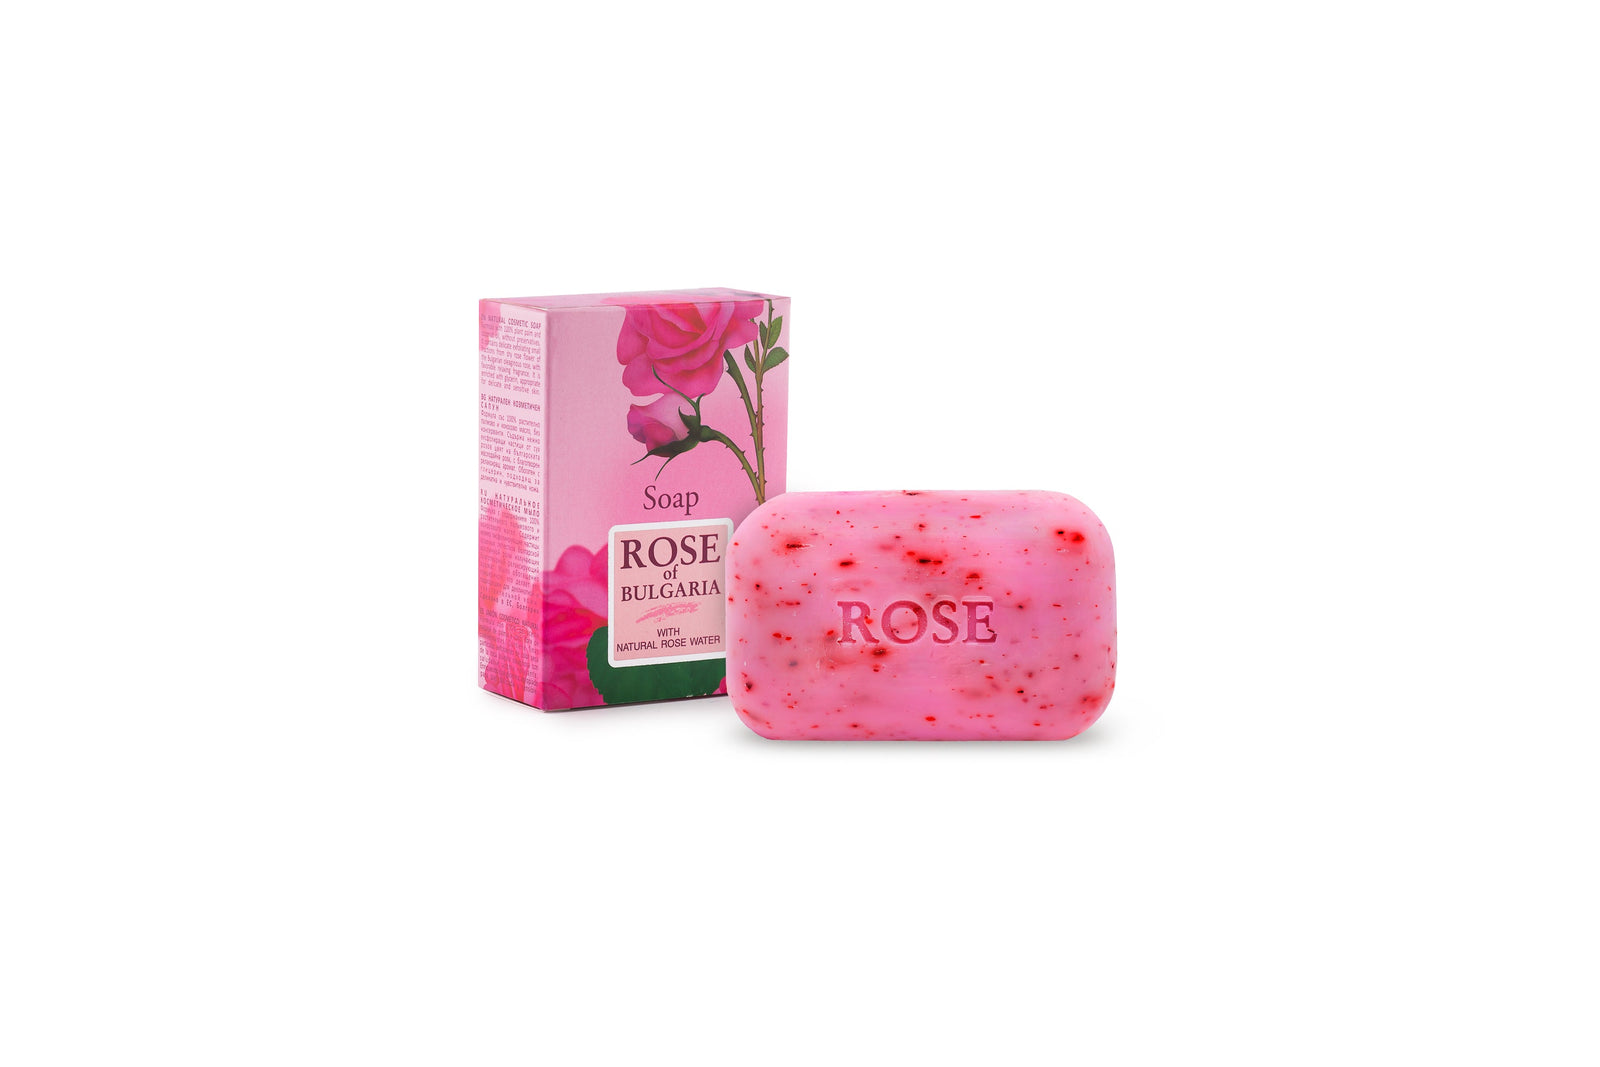 Natural Soap with Rose Water Rose of Bulgaria - 40g.